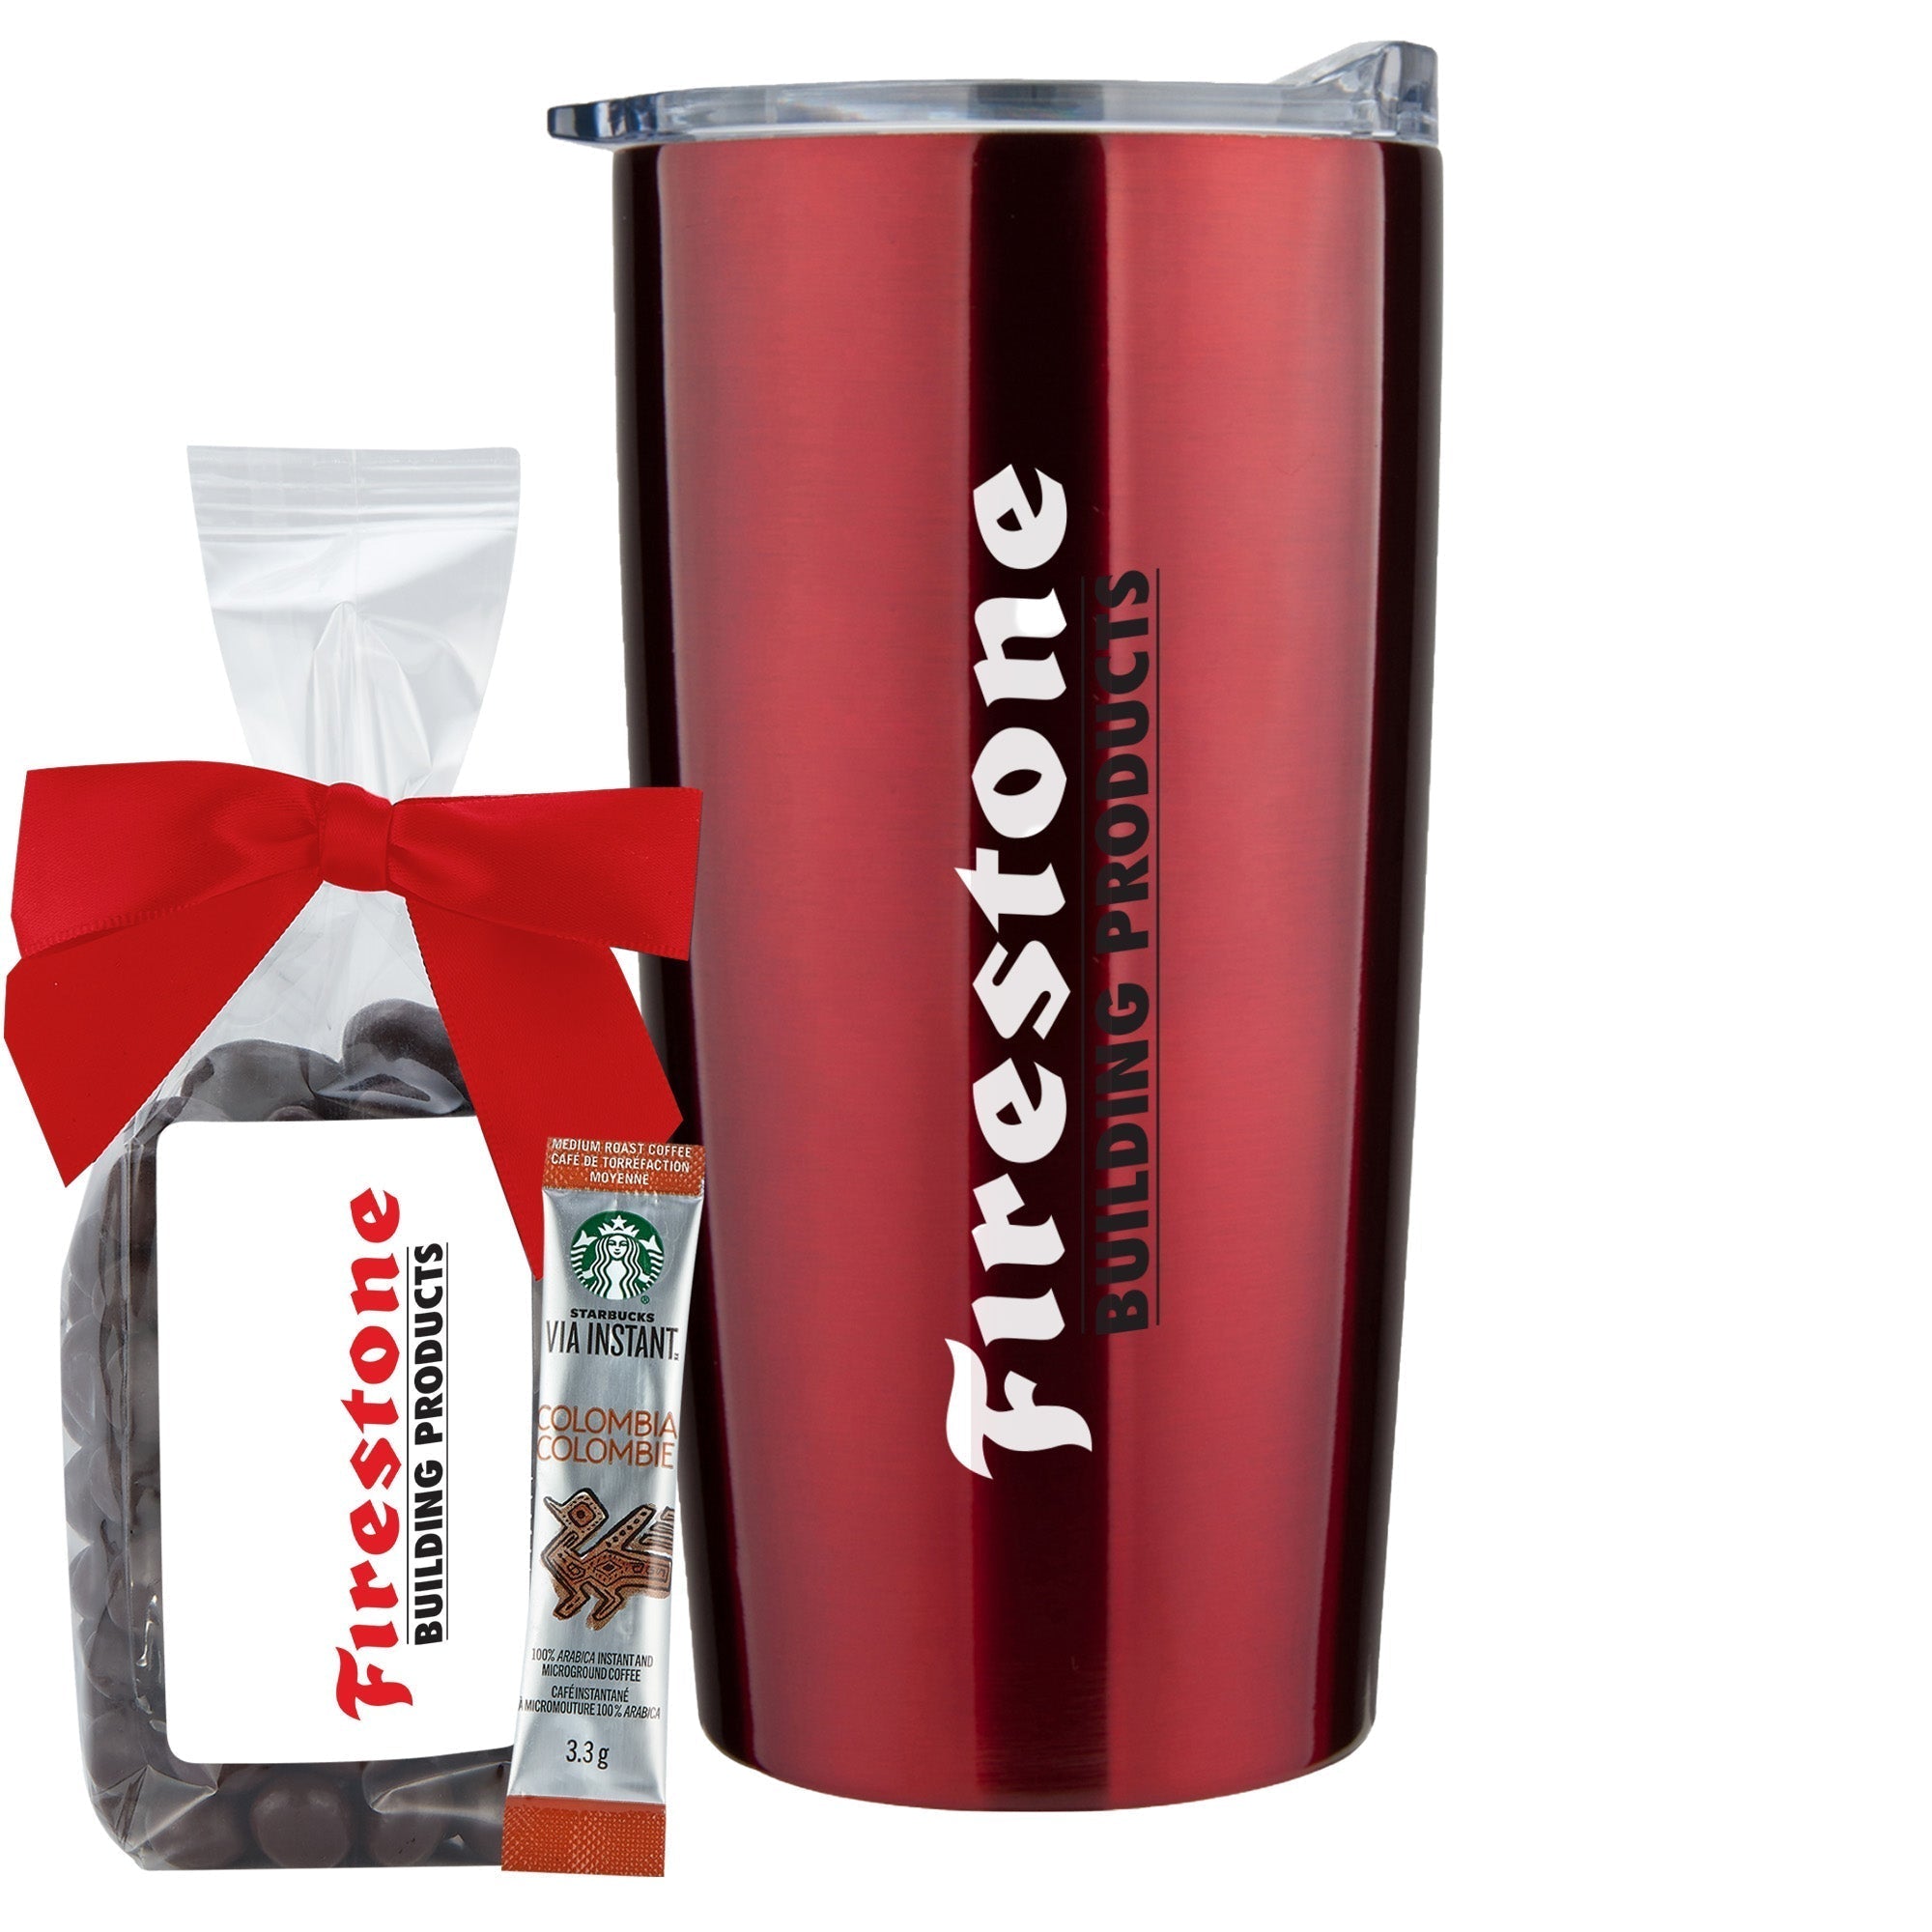 Starbucks Iconic 20oz Stainless Steel Thermos Mug for Coffee